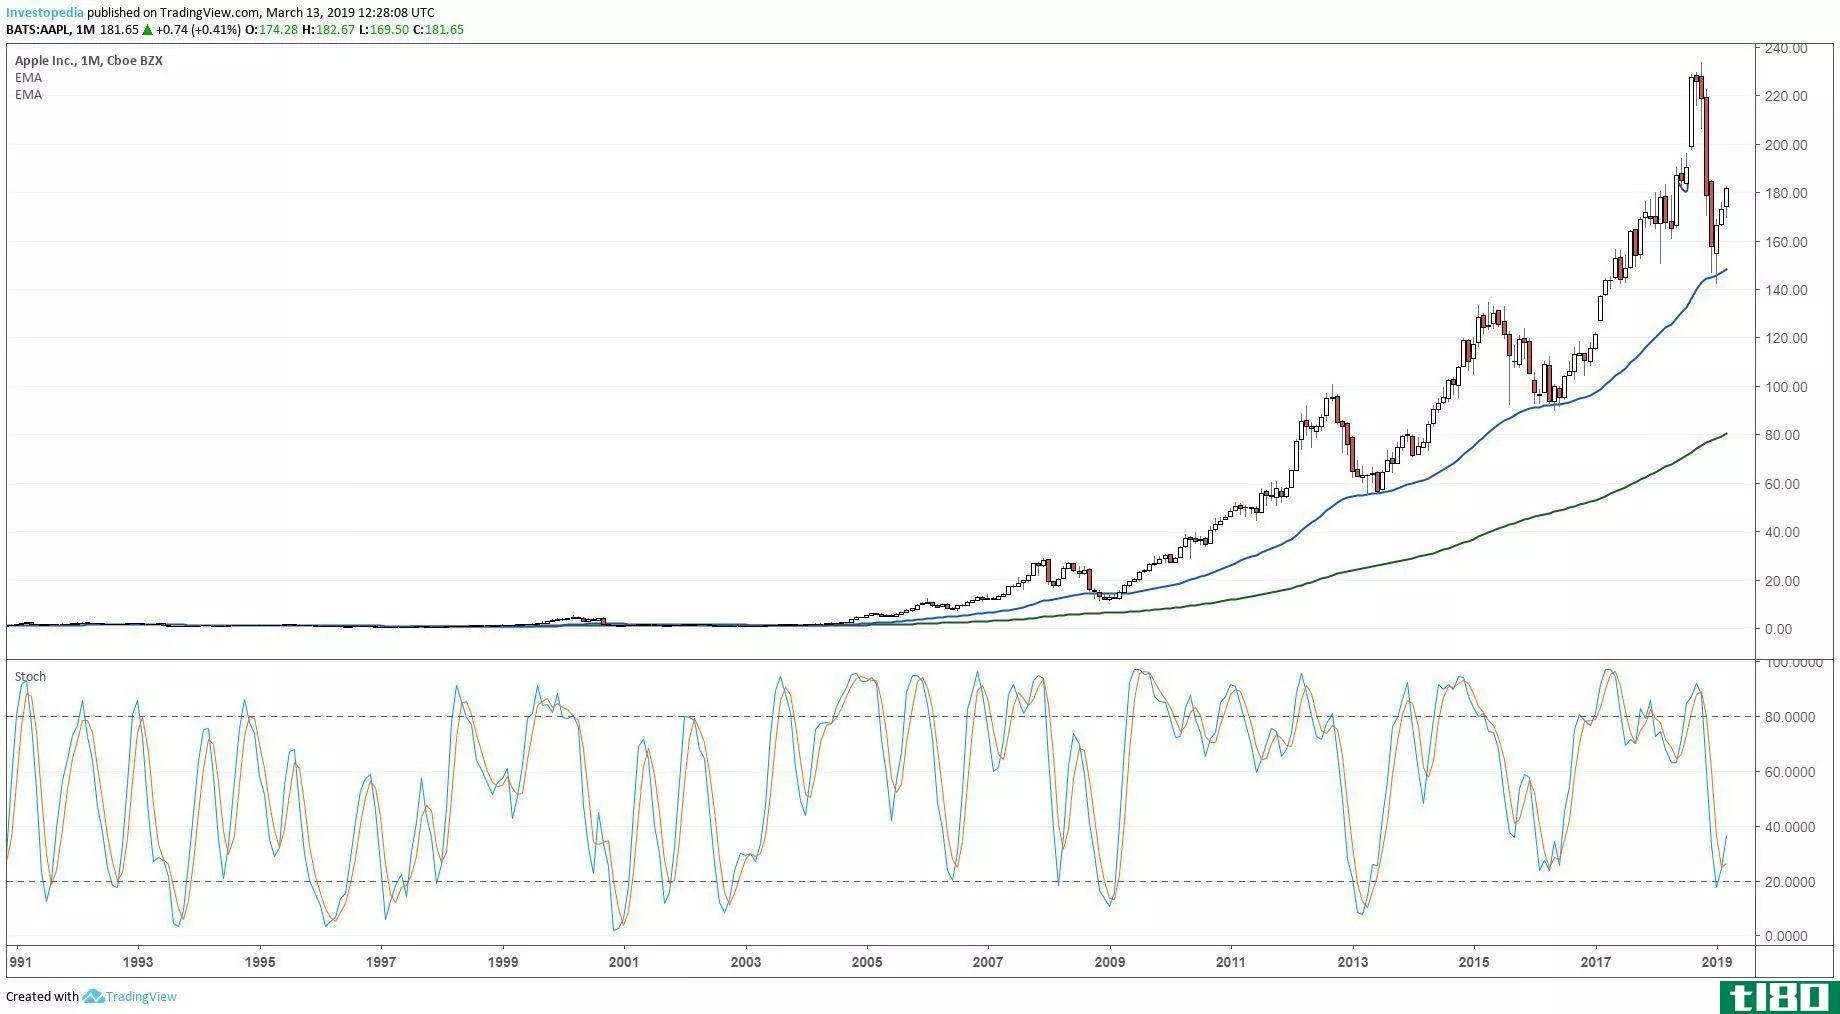 Long-term technical chart showing the share price performance of Apple Inc. (AAPL)